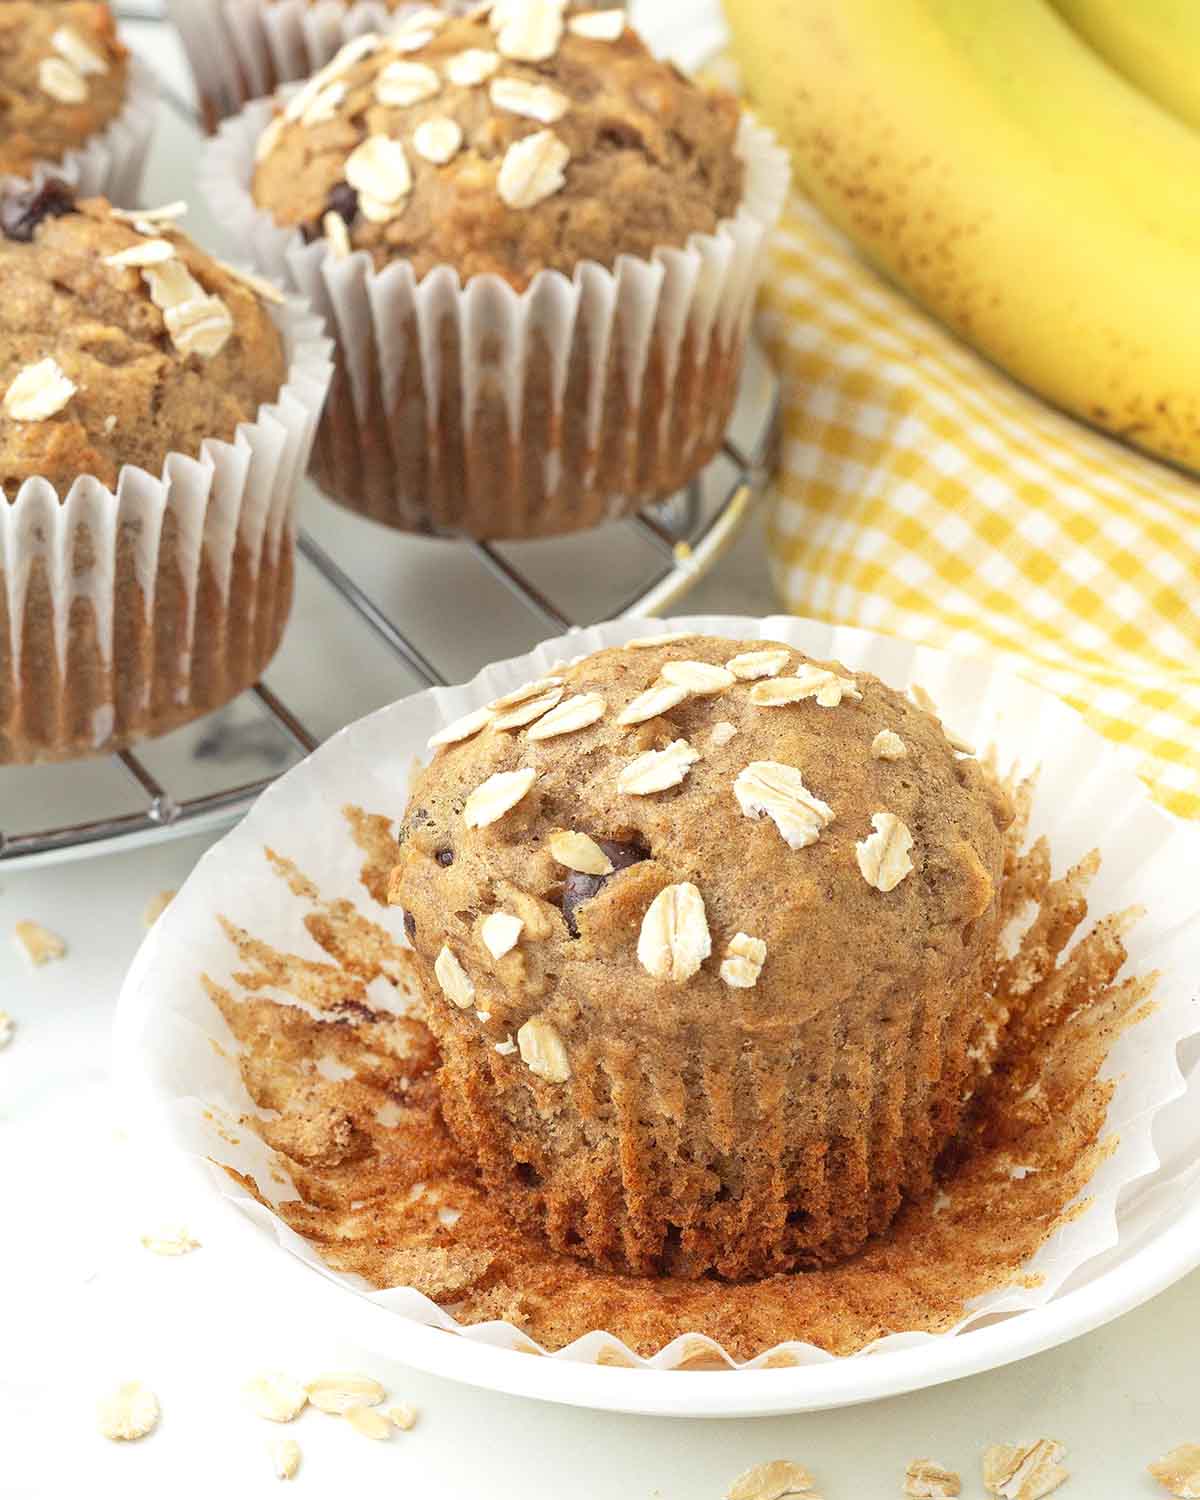 A banana oat muffin on a plate, the muffin wrapper has been peeled away.